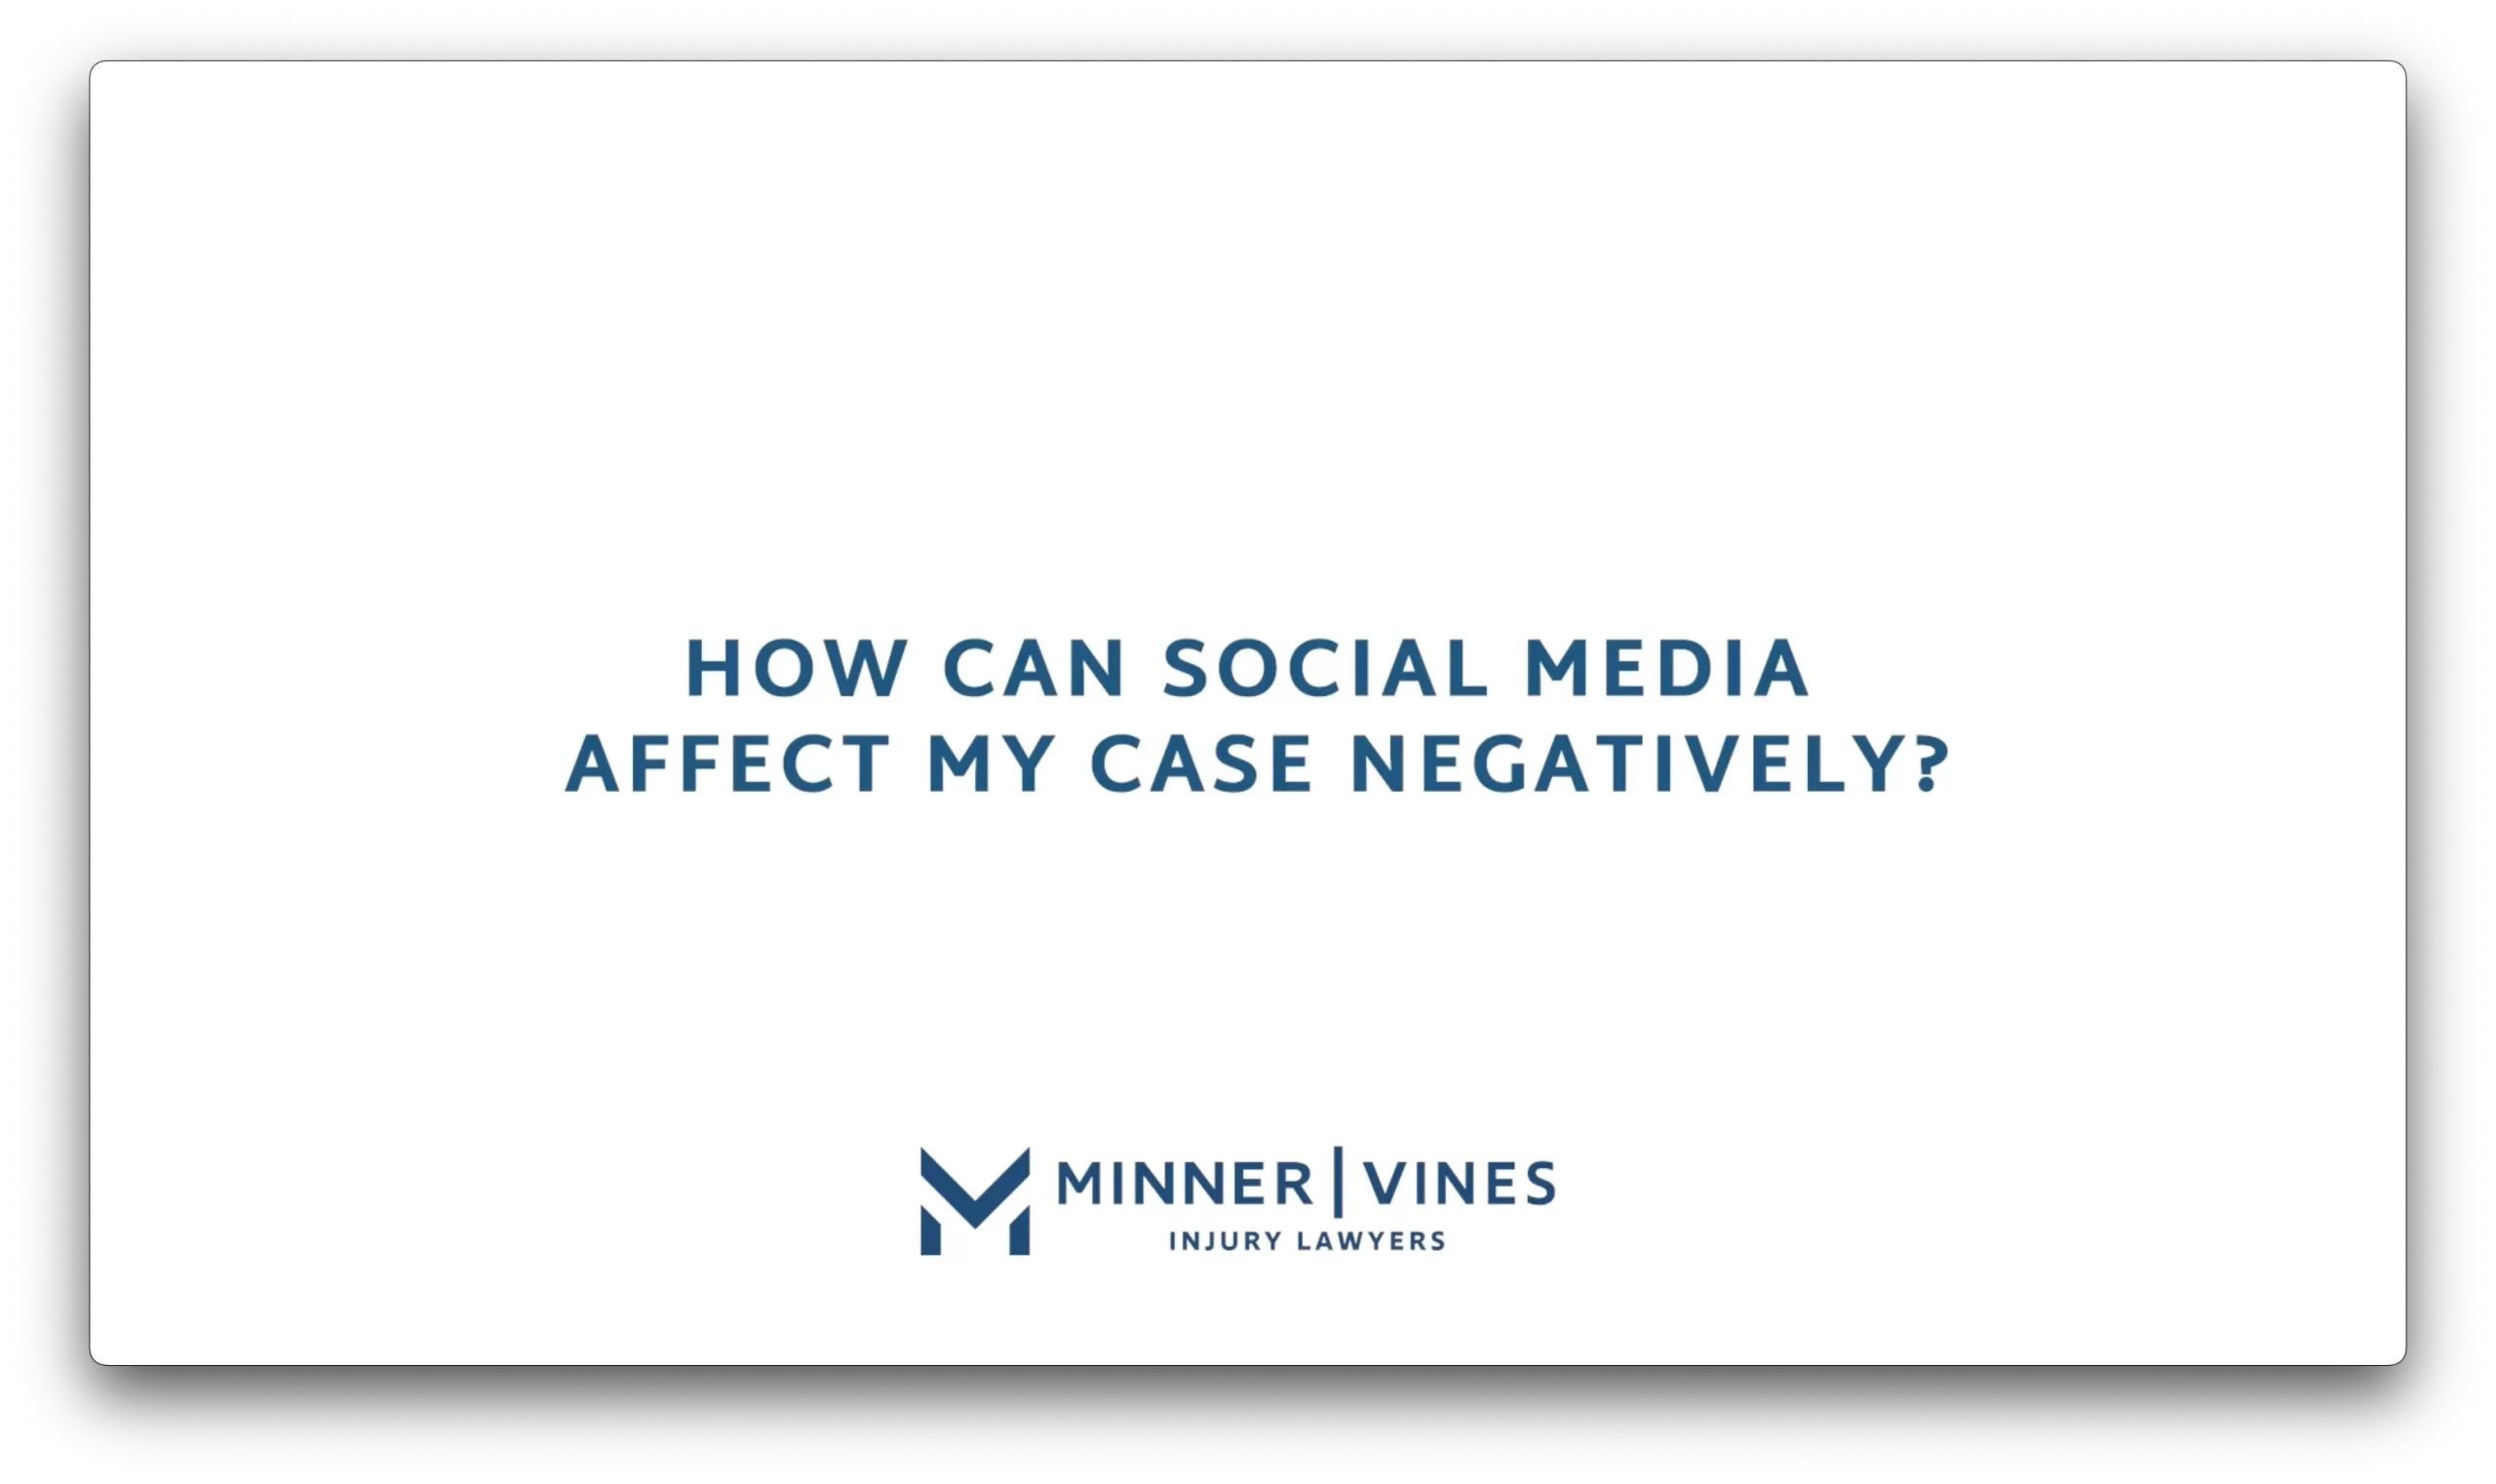 How can social media affect my case negatively?